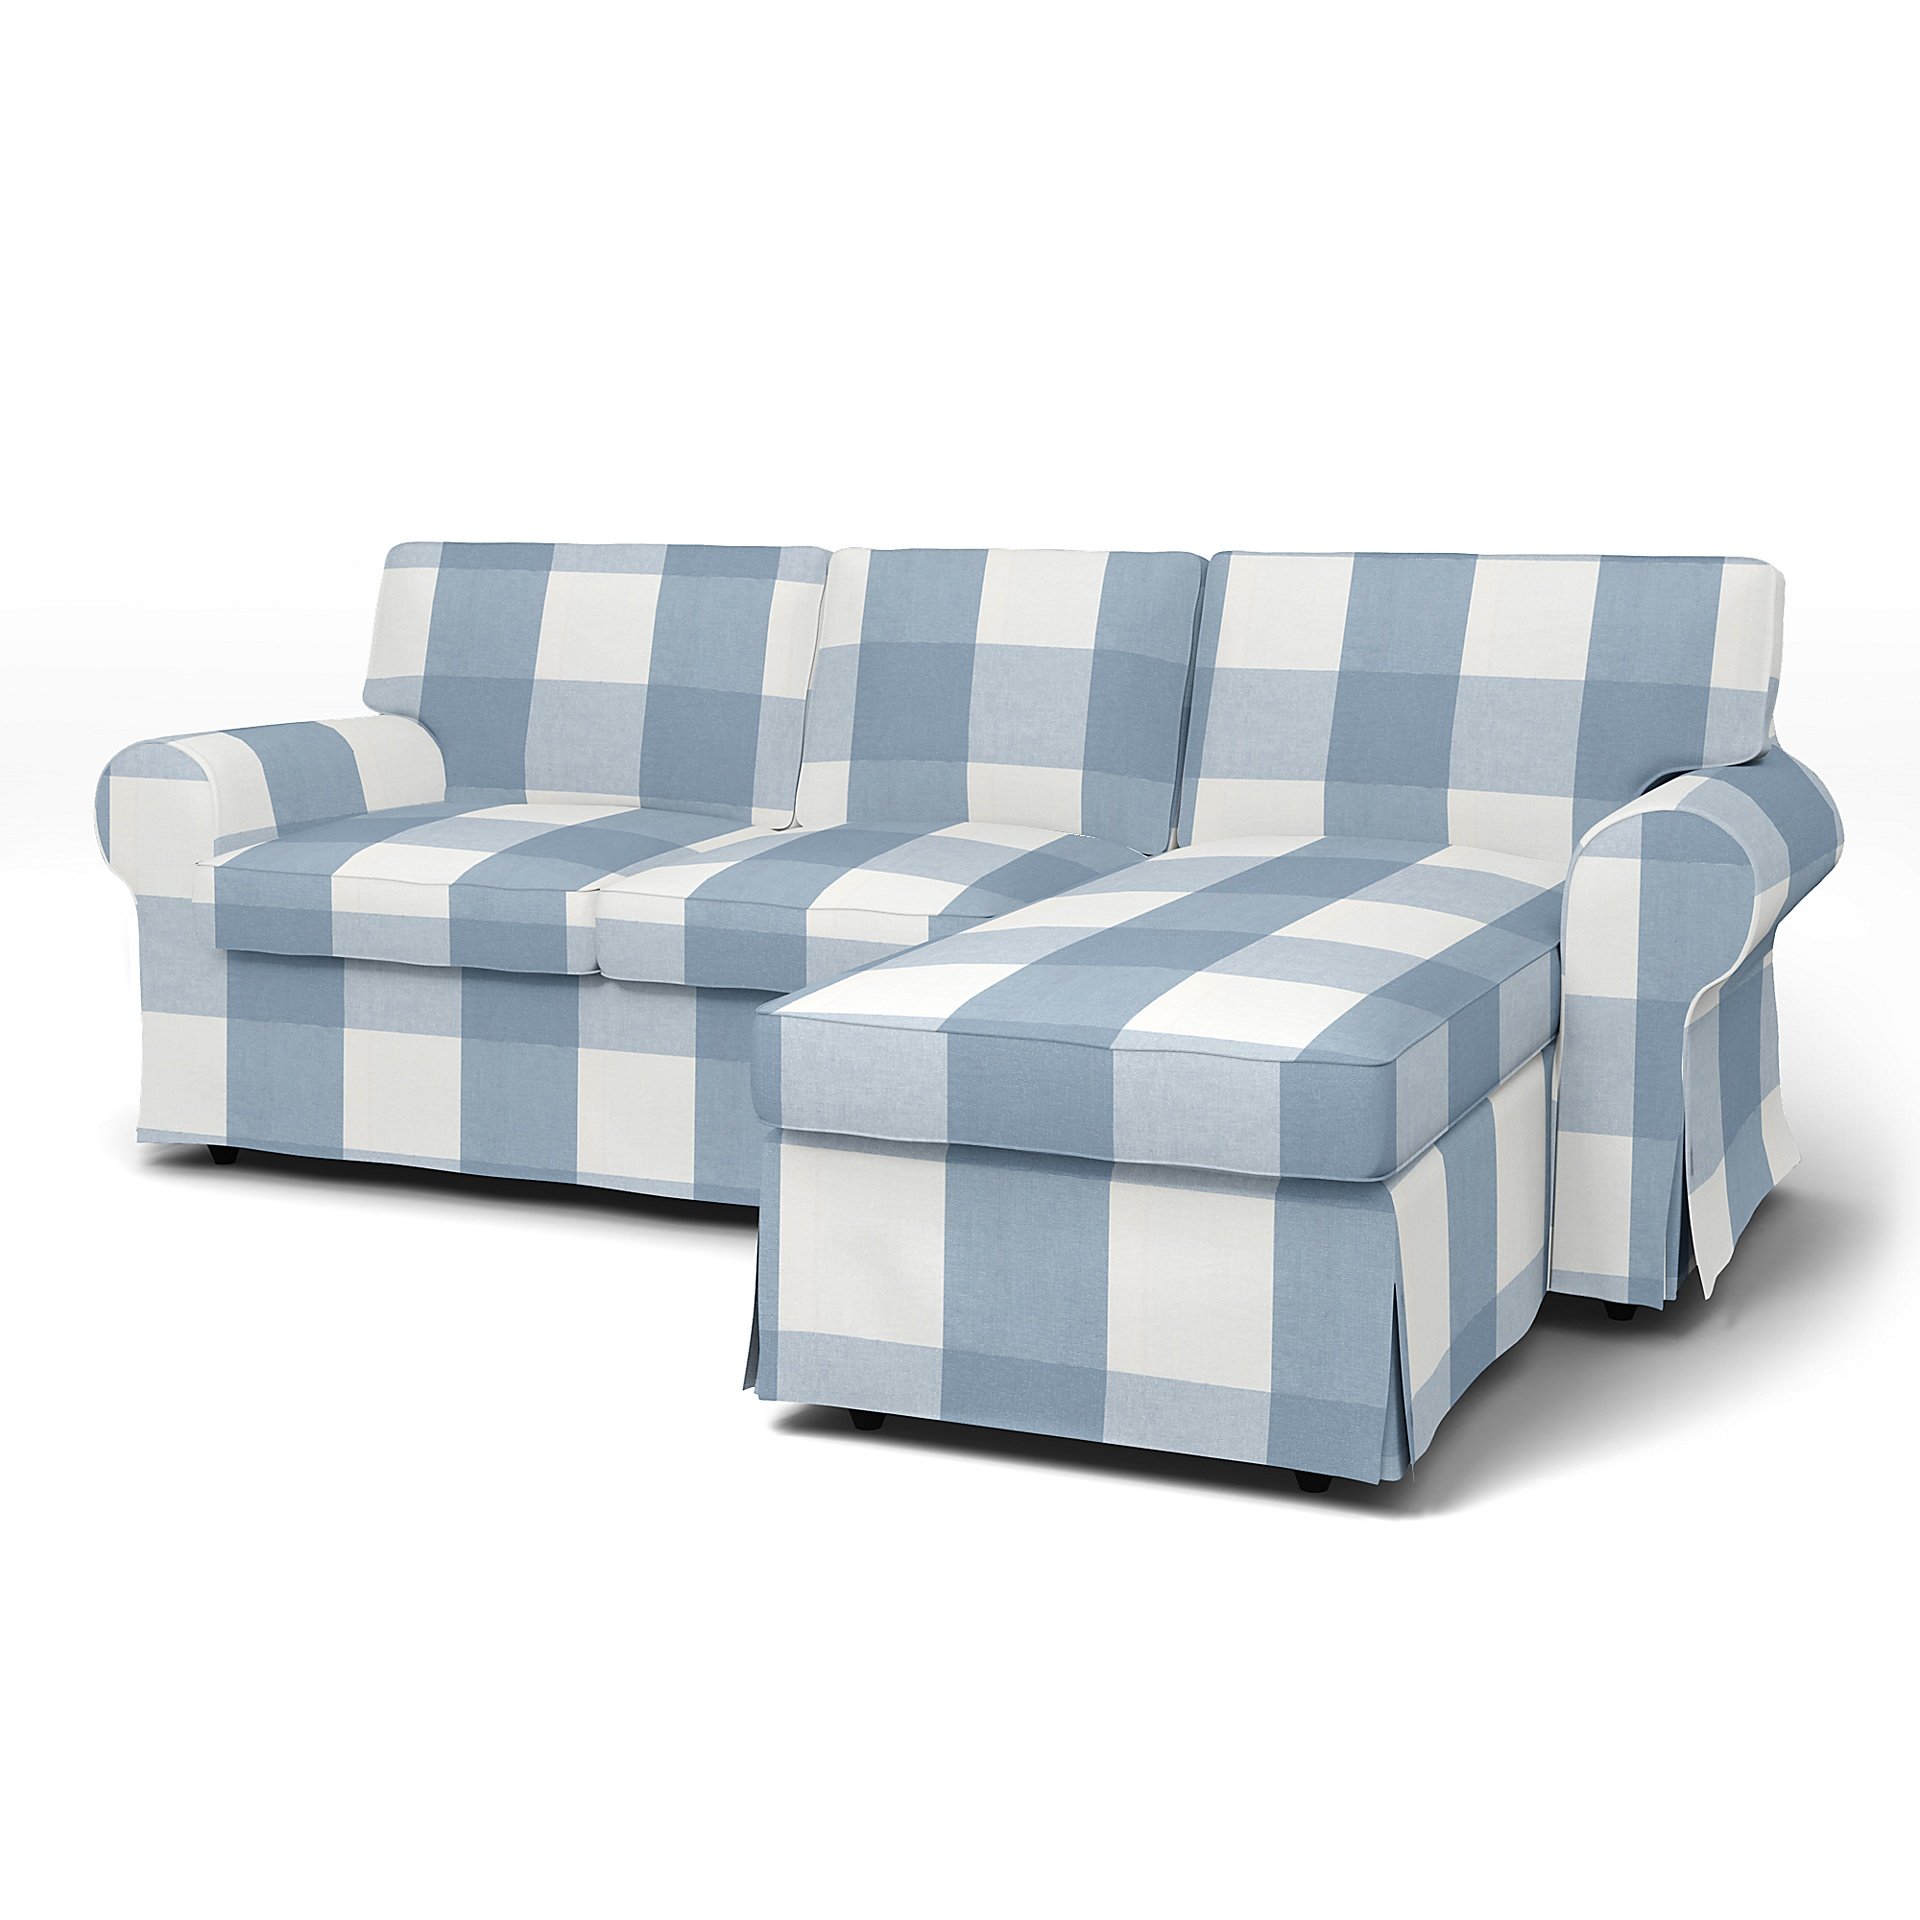 IKEA - Ektorp 3 Seater Sofa with Chaise Cover, Sky Blue, Linen - Bemz